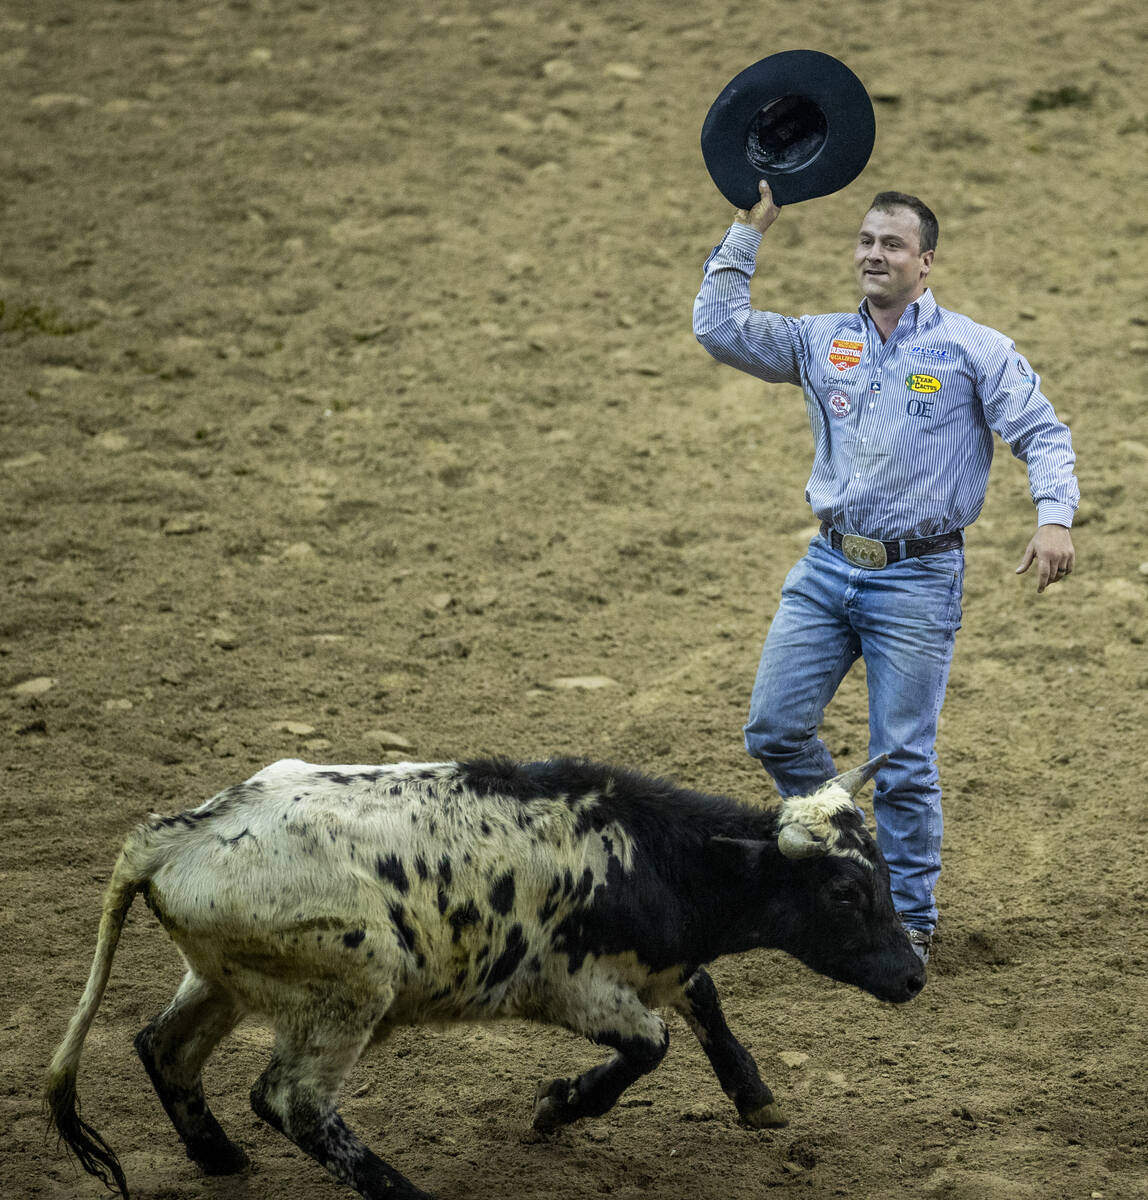 Tristan Martin of Sulphur, Louisiana, is pleased after downing his animal in Steer Wrestling fo ...